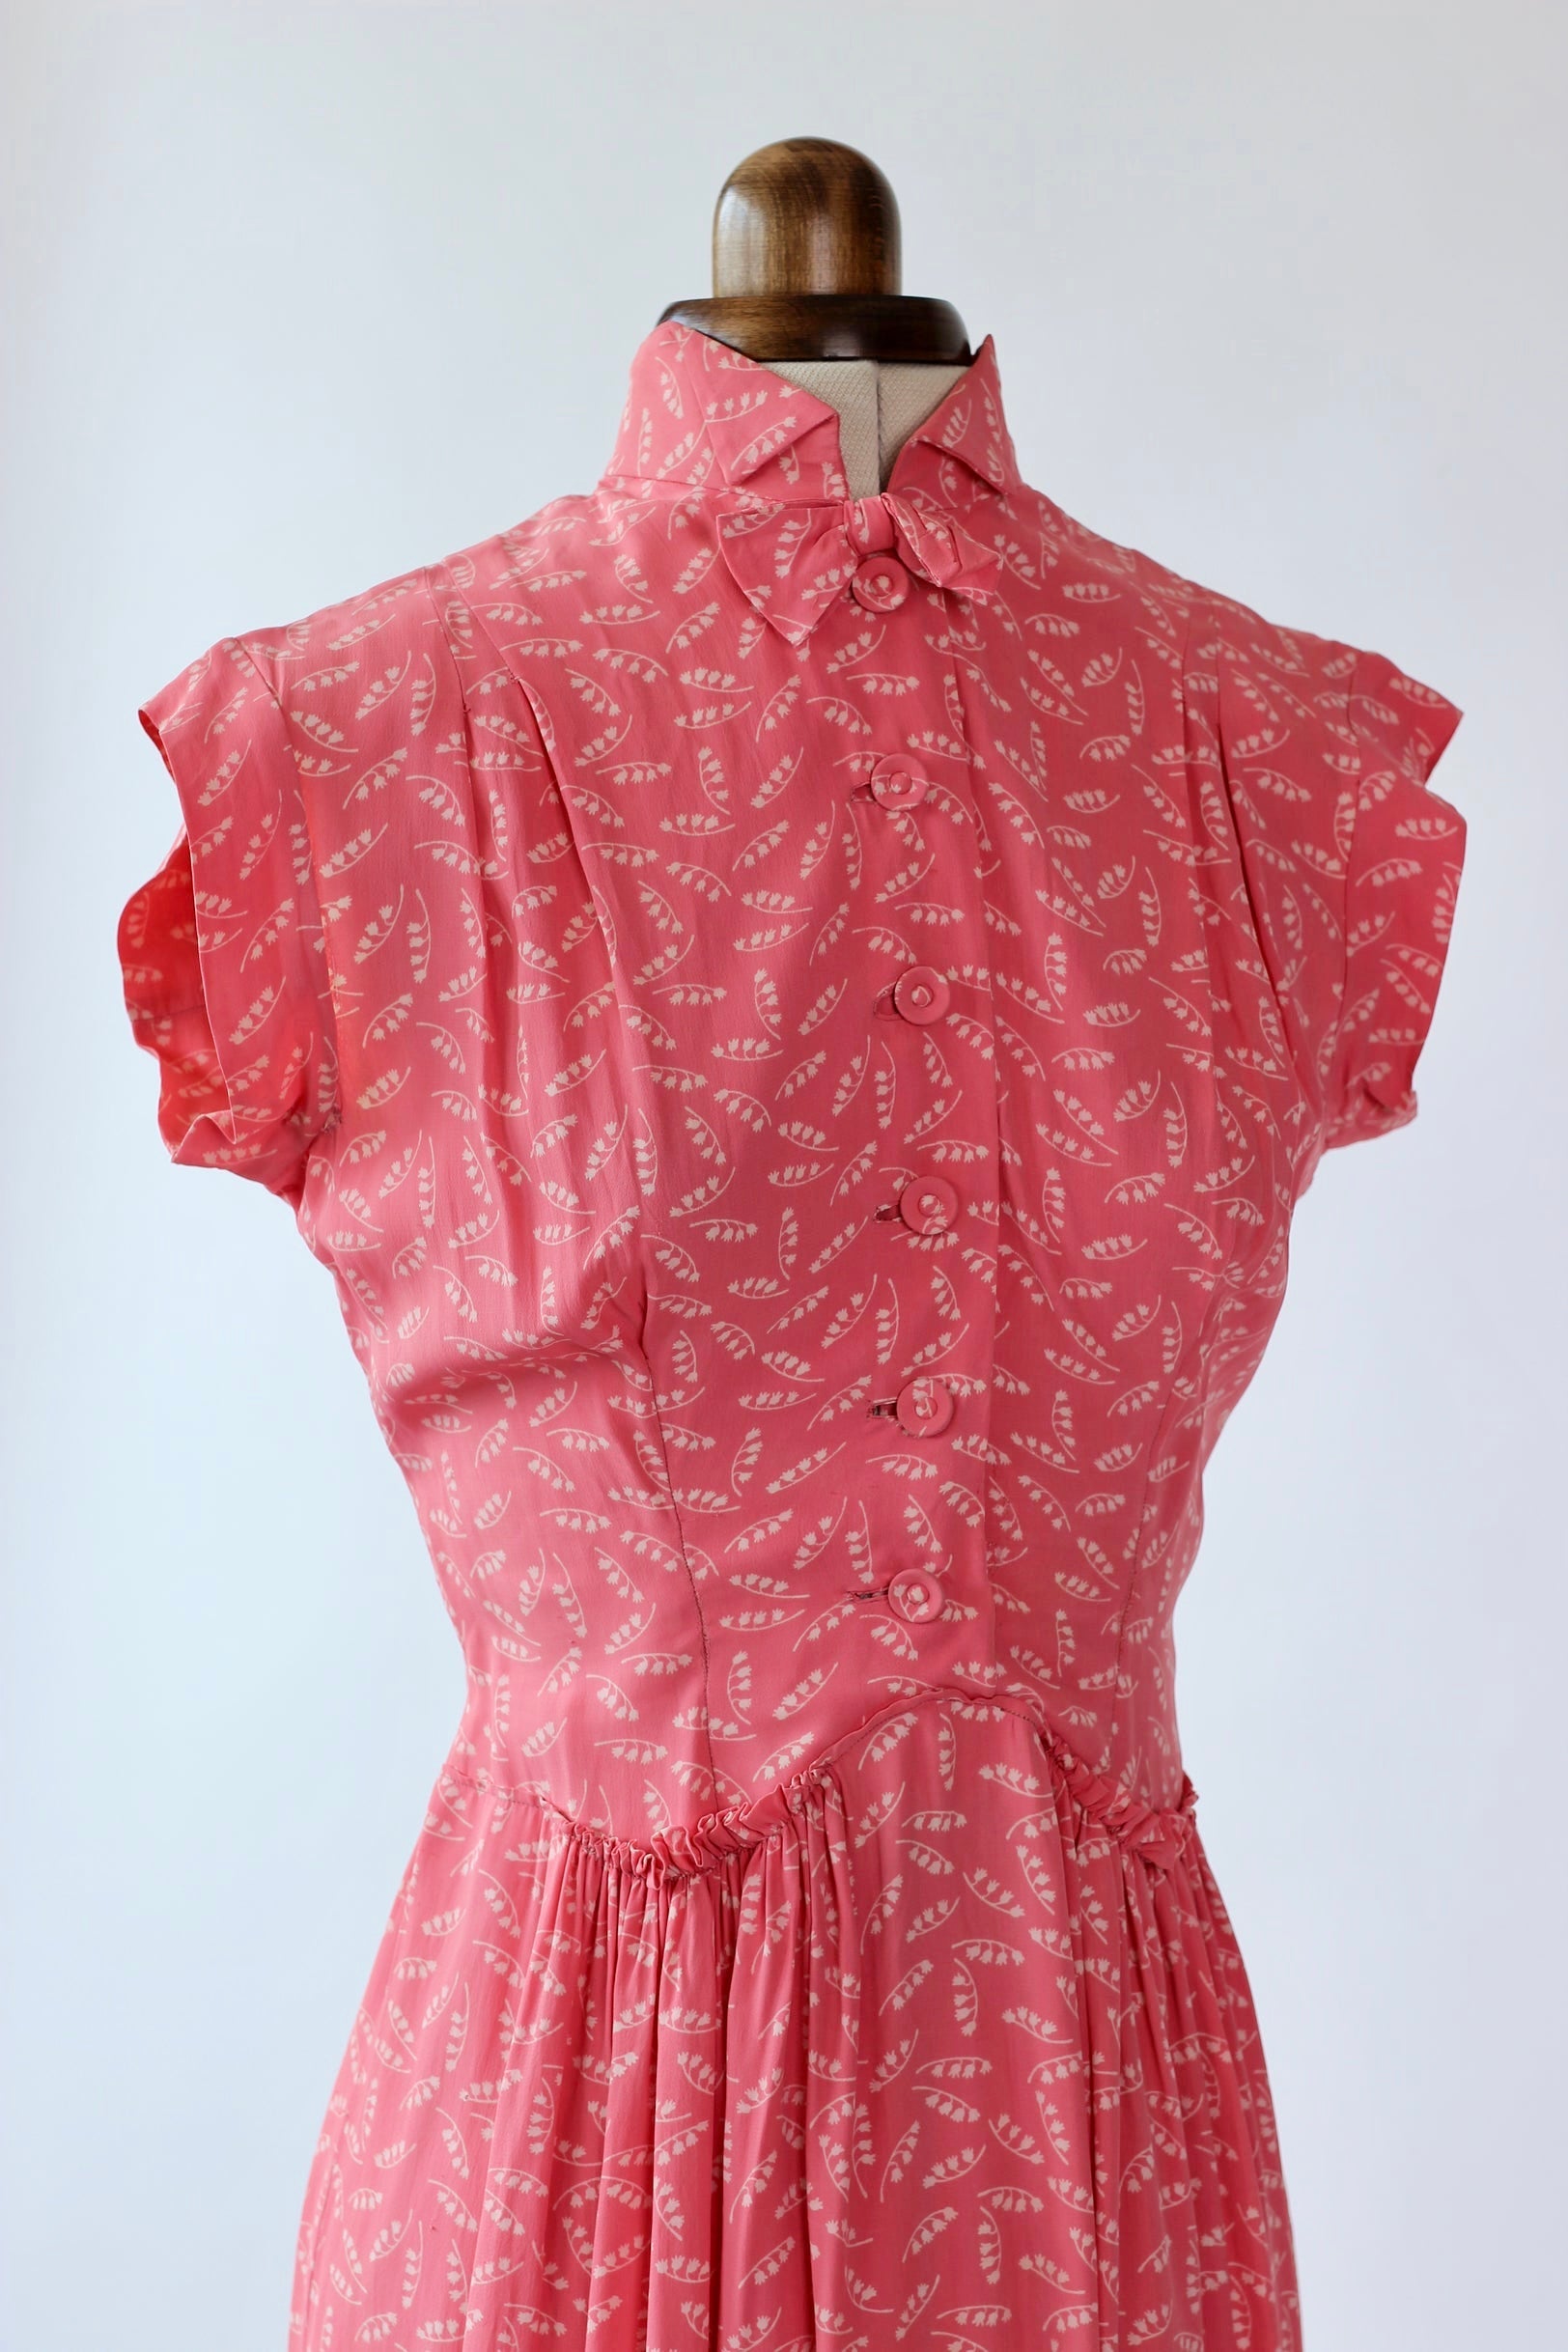 1940s Peach Novelty Print Dress with White Leaves//Size XS/S